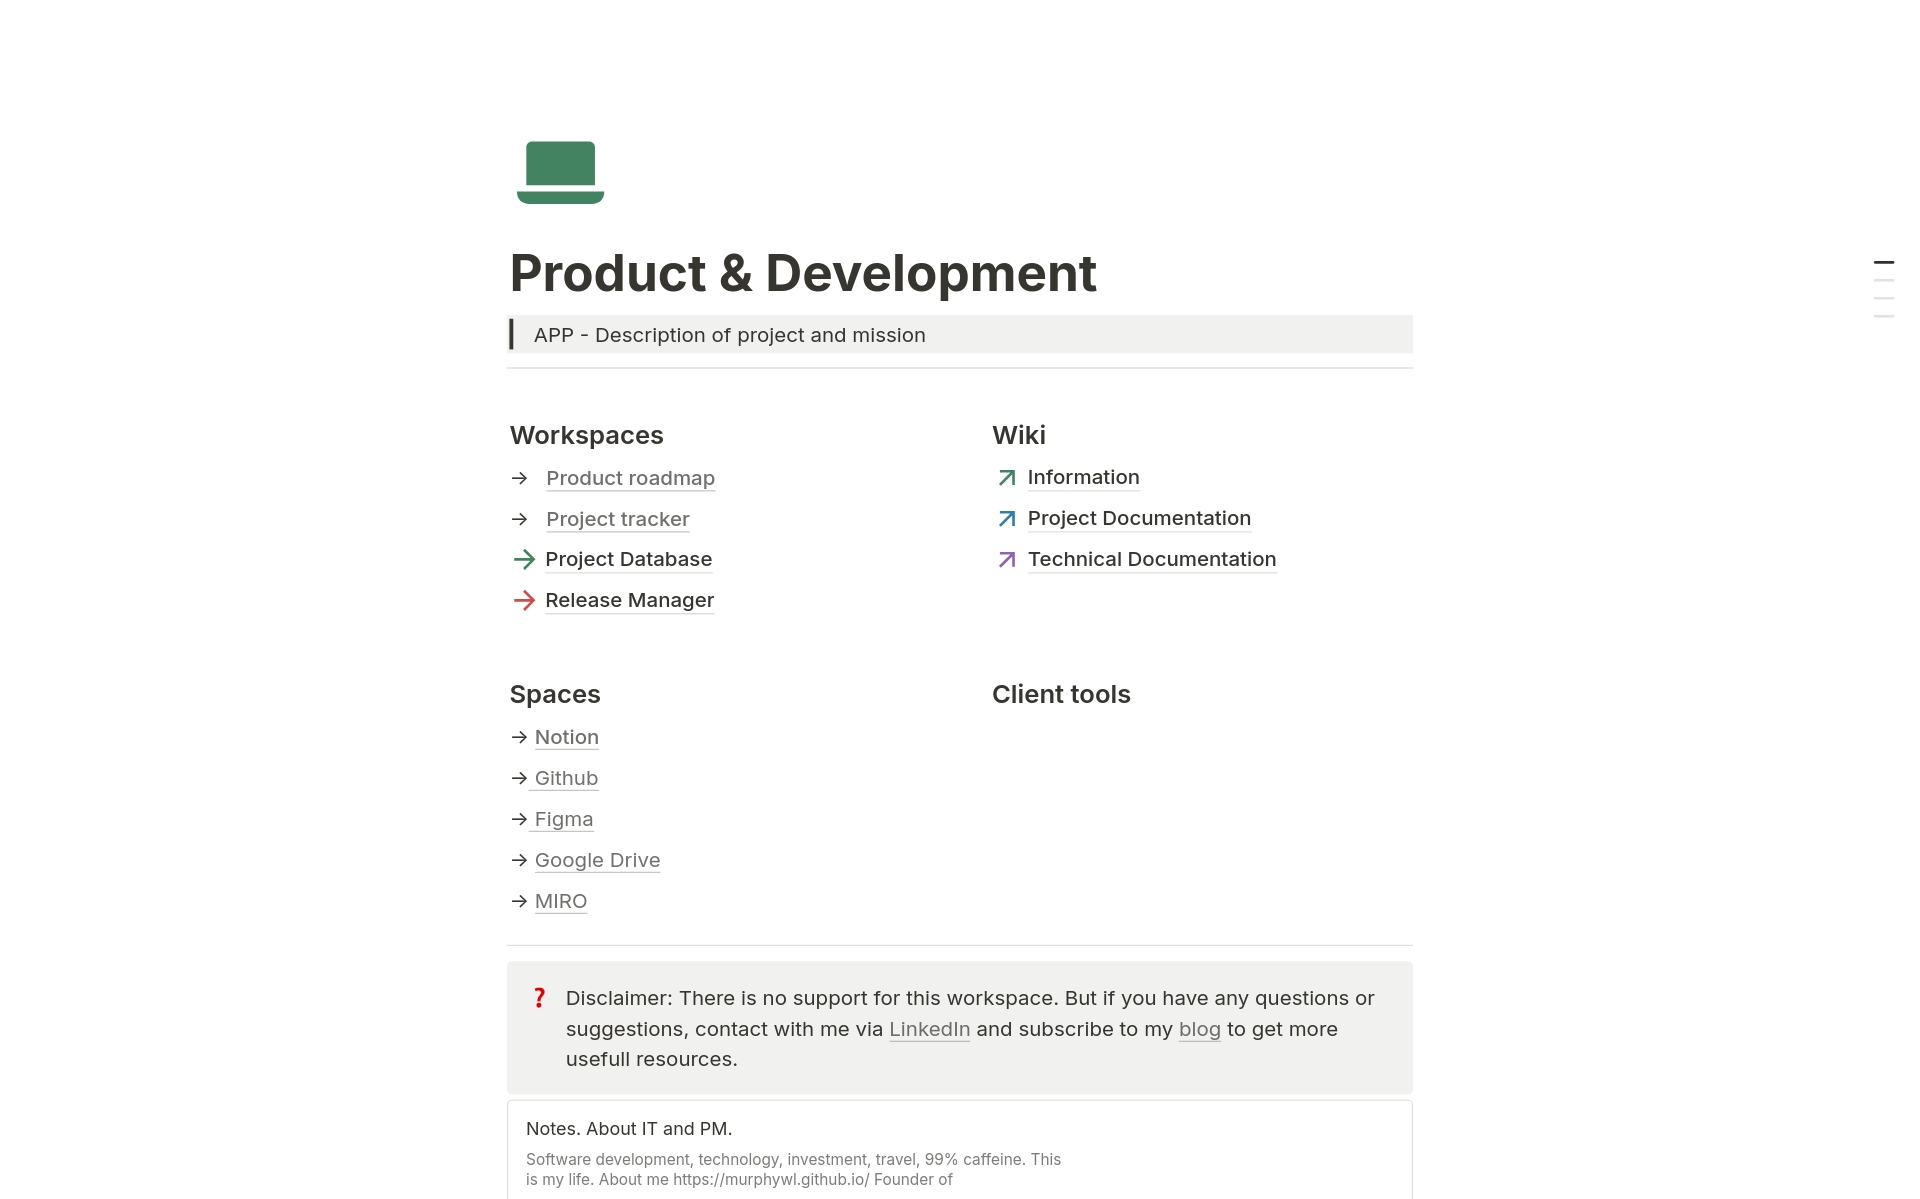 This template will help you quickly launch the development of a small product or MVP